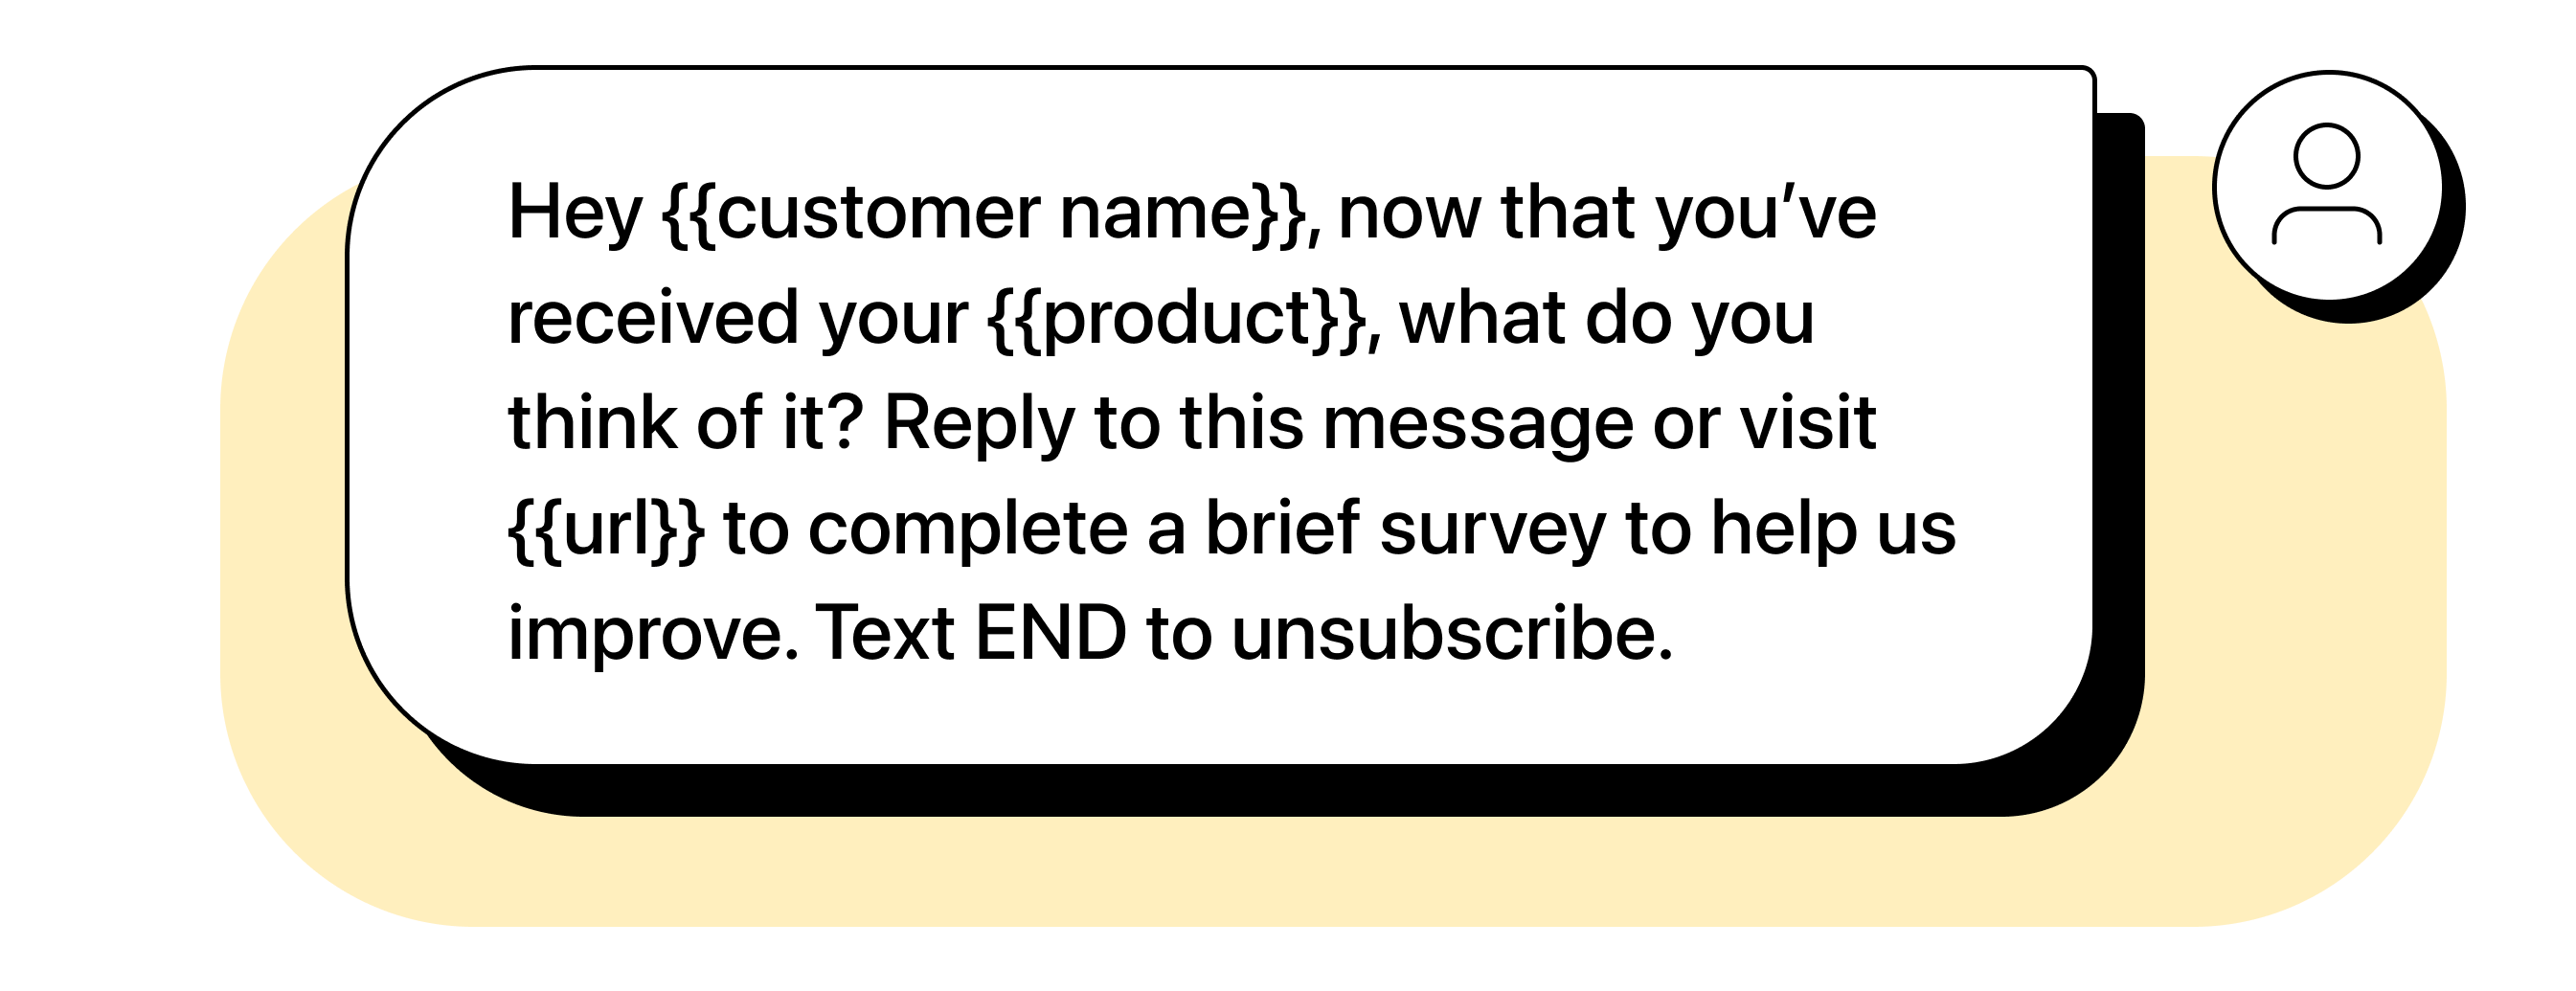 Survey request SMS template